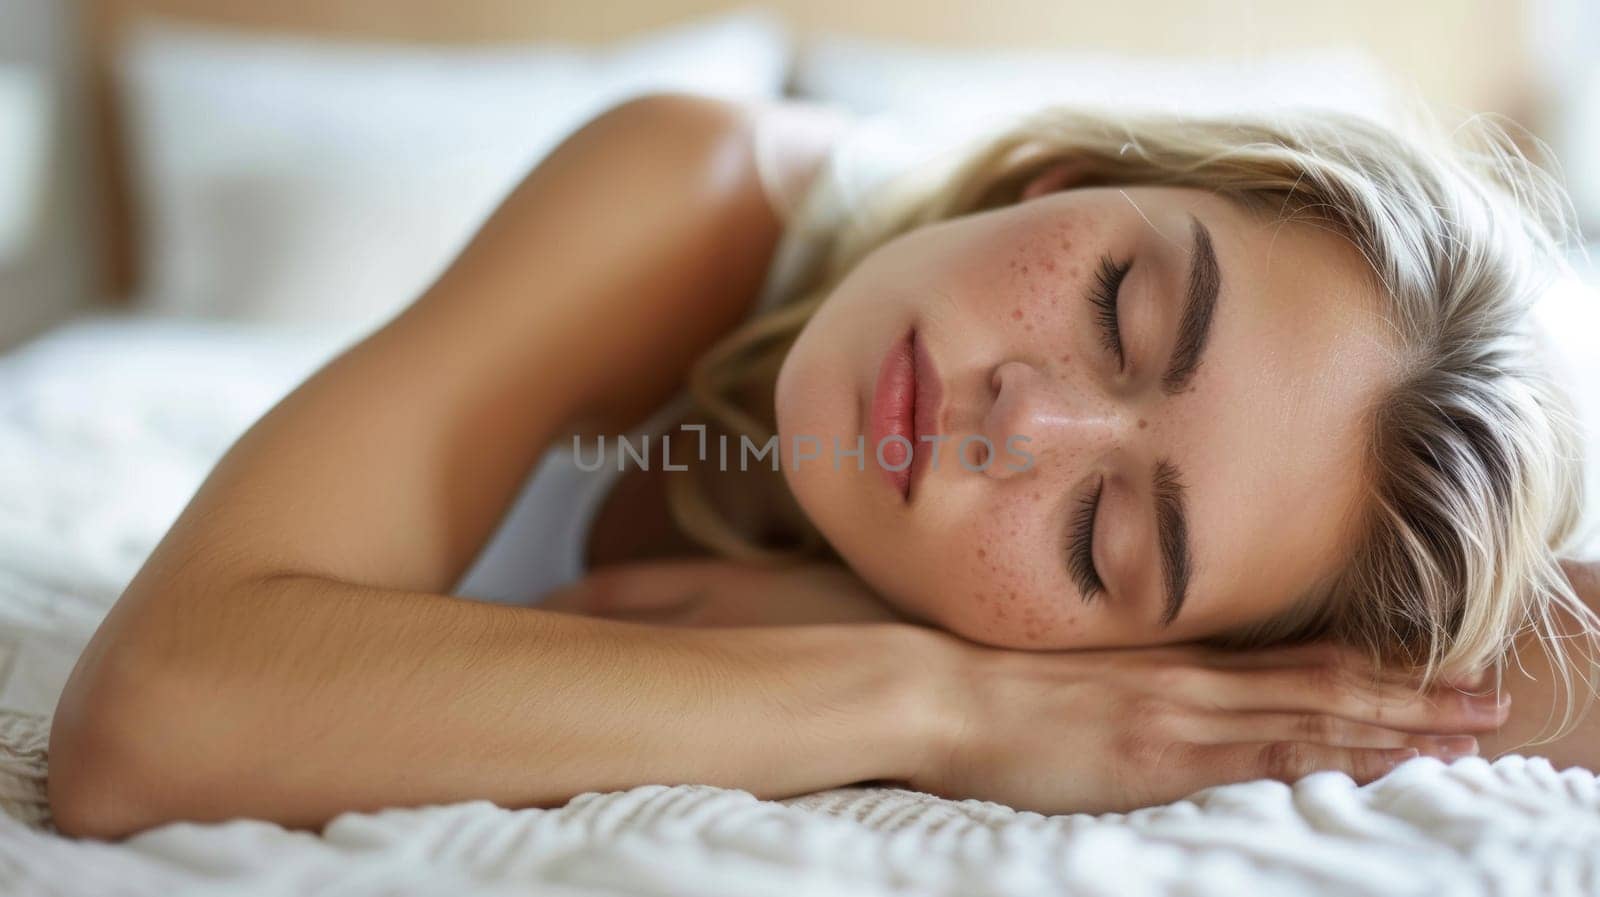 A woman sleeping on a bed with her eyes closed